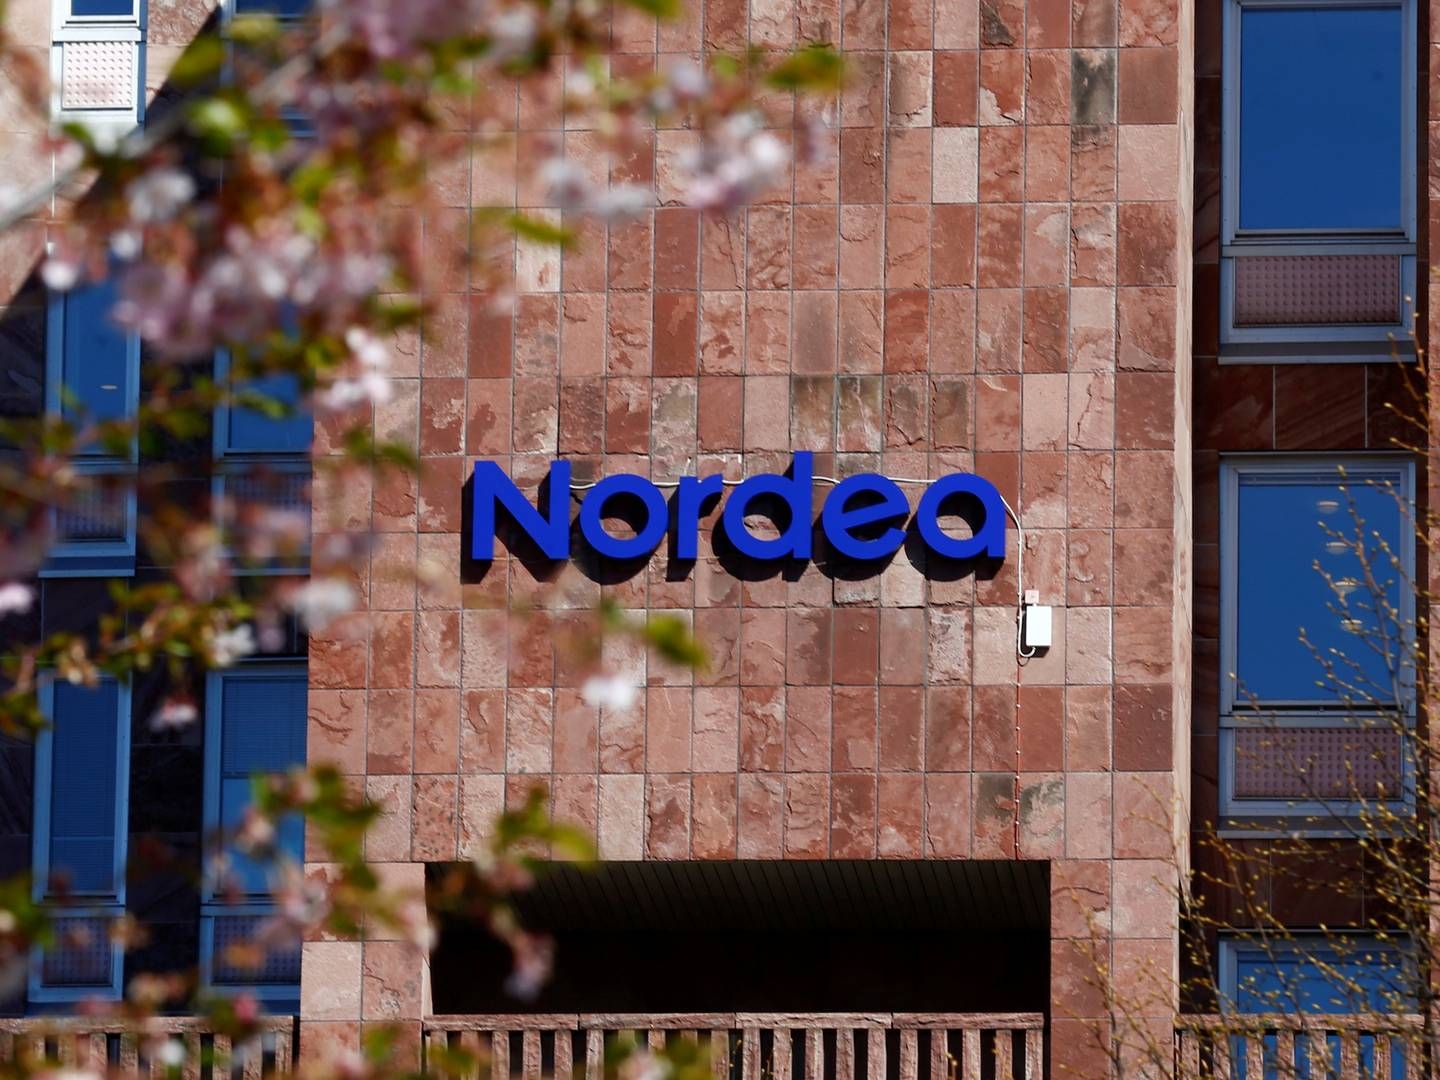 The Nordea bank logo is seen at the bank's headquarters in Stockholm | Photo: INTS KALNINS/REUTERS / X02120